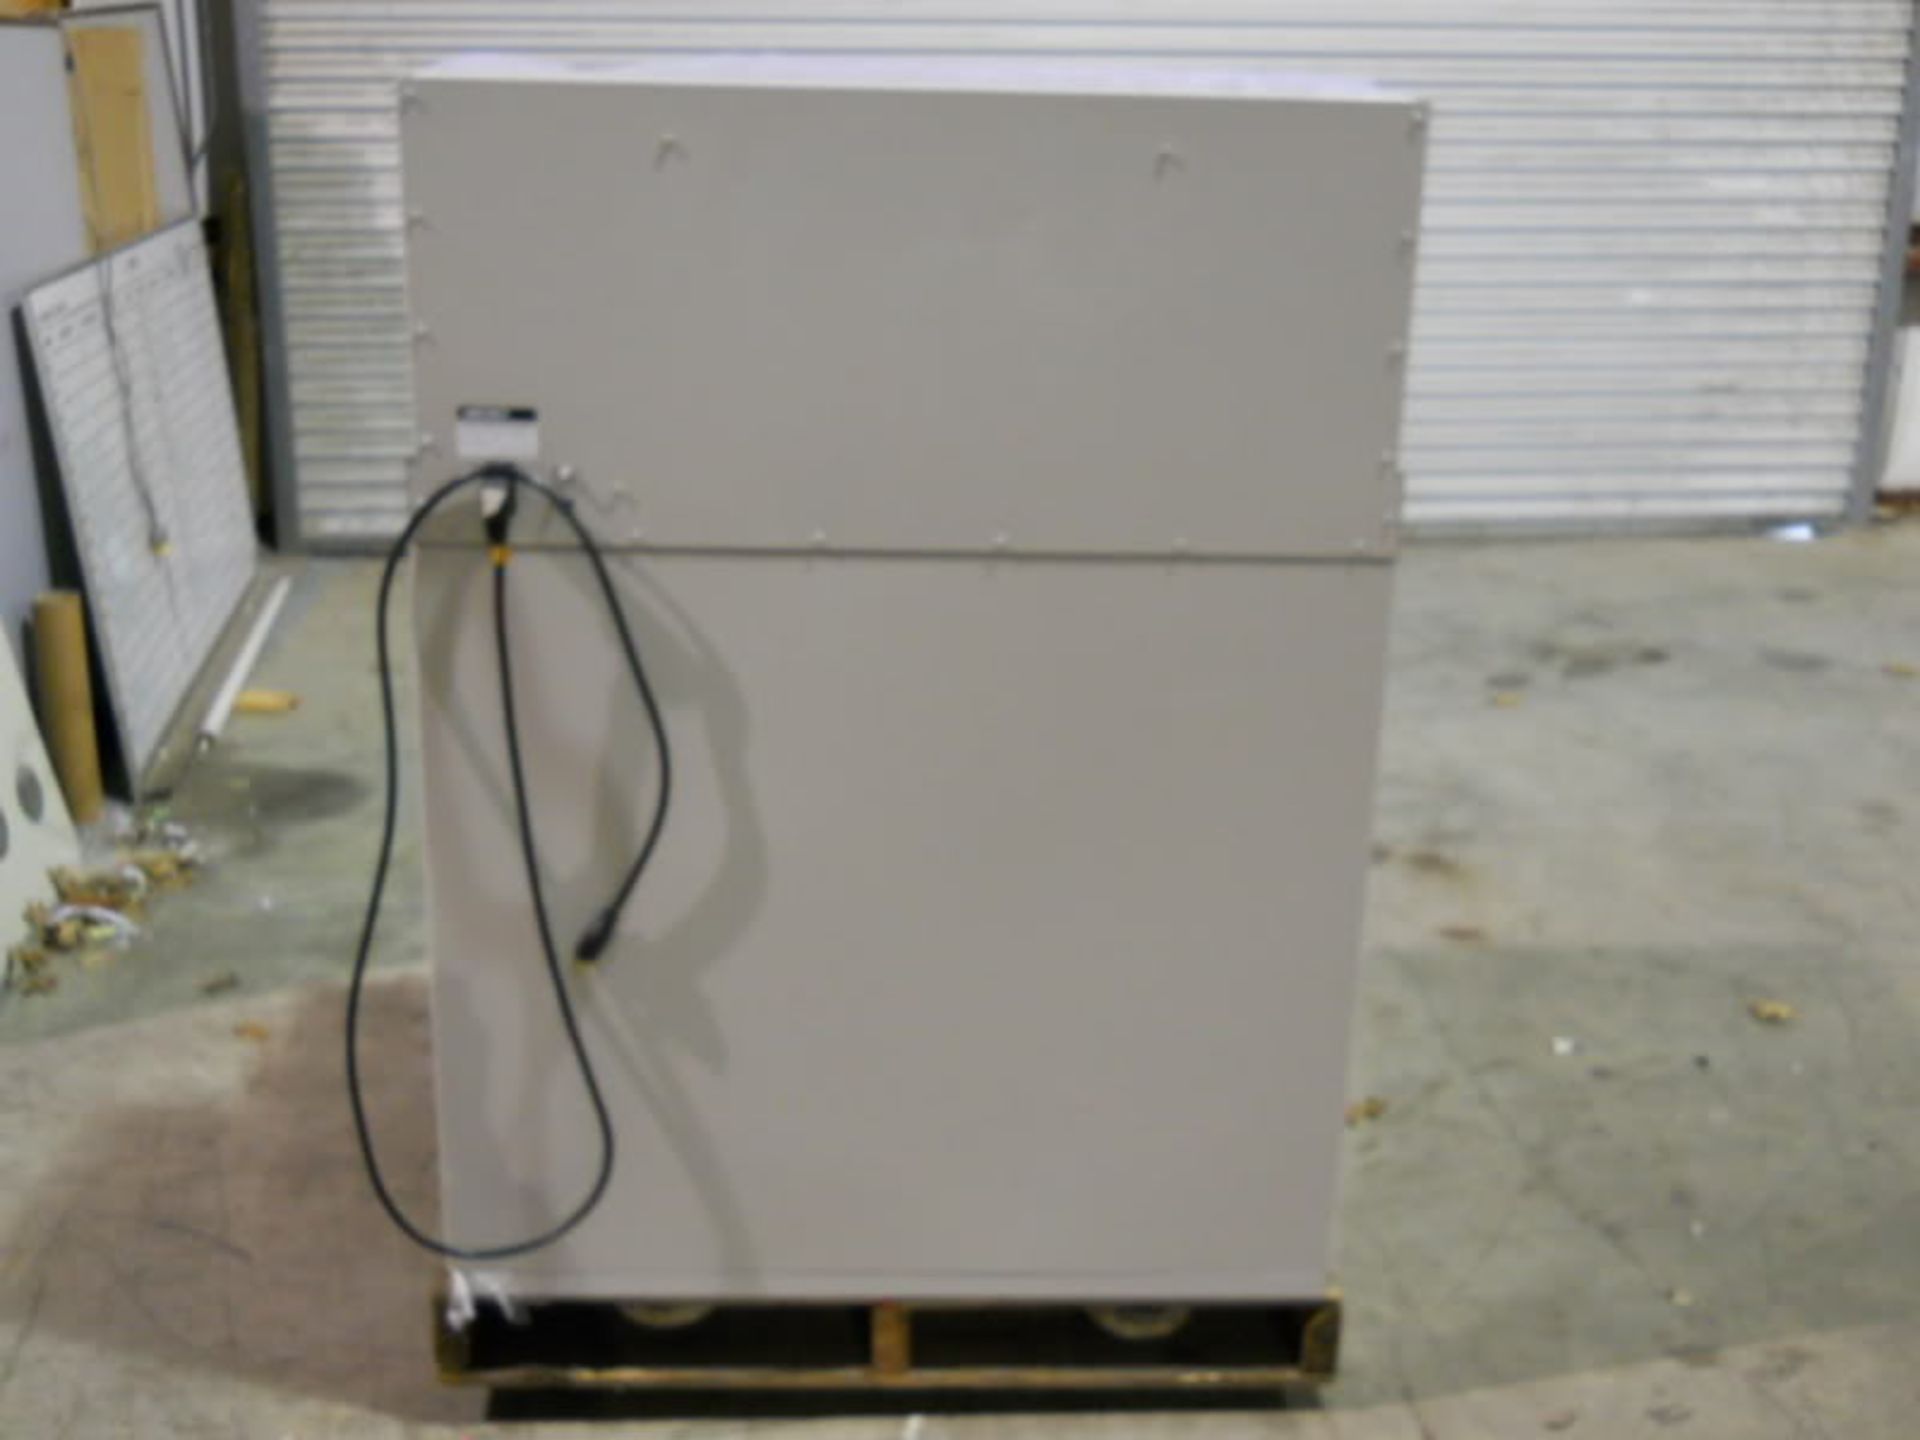 Labconco Purifier Clean Bench Cat 36000-00 S (Fume Exhaust Hood - 3600000S), Qty 1, 221183566464 - Image 8 of 11